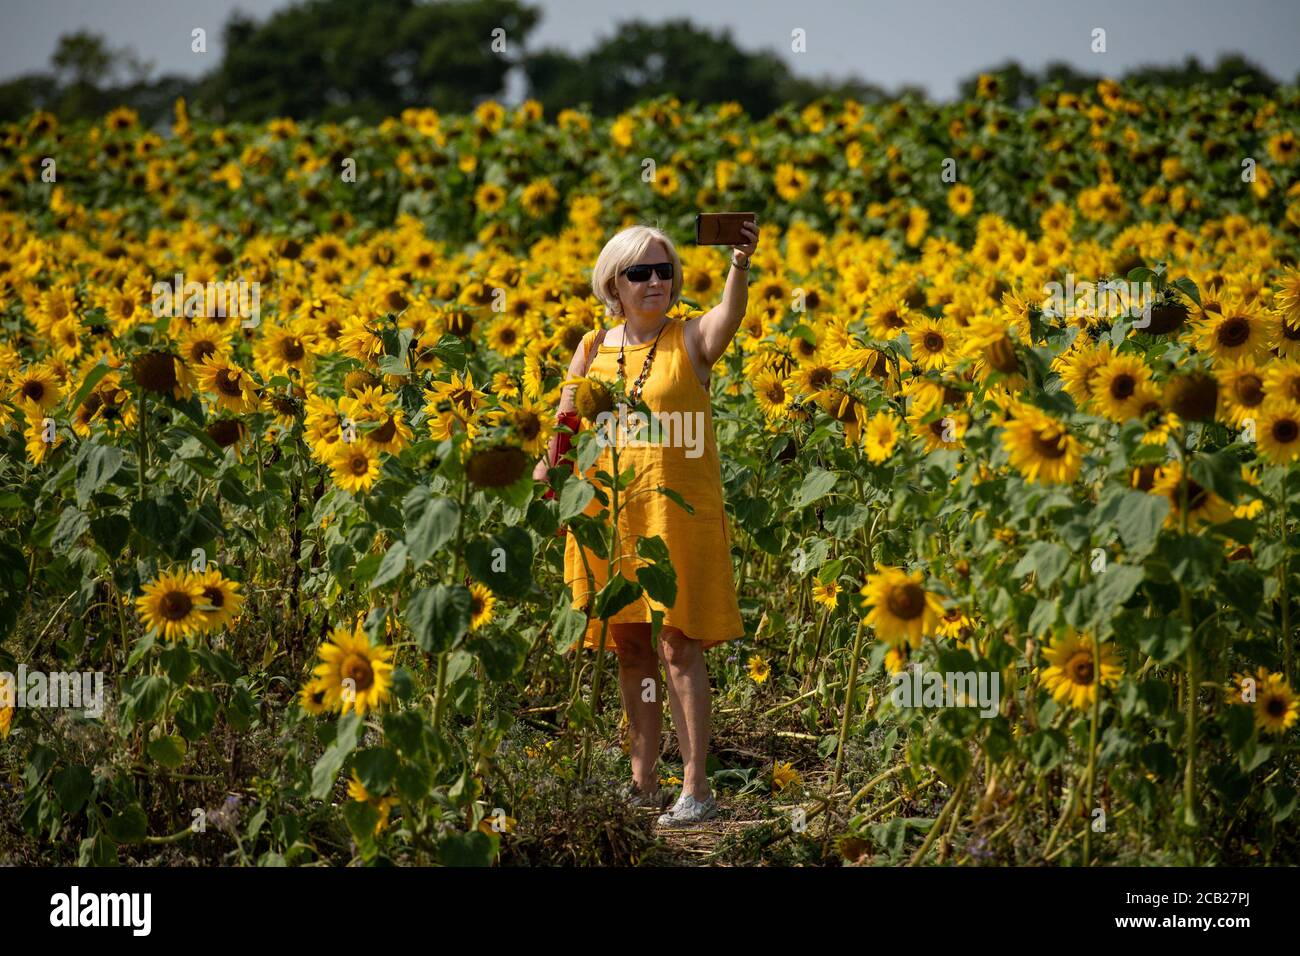 People enjoy the hot weather and sunflower fields at Becketts Farm, Birmingham. Stock Photo